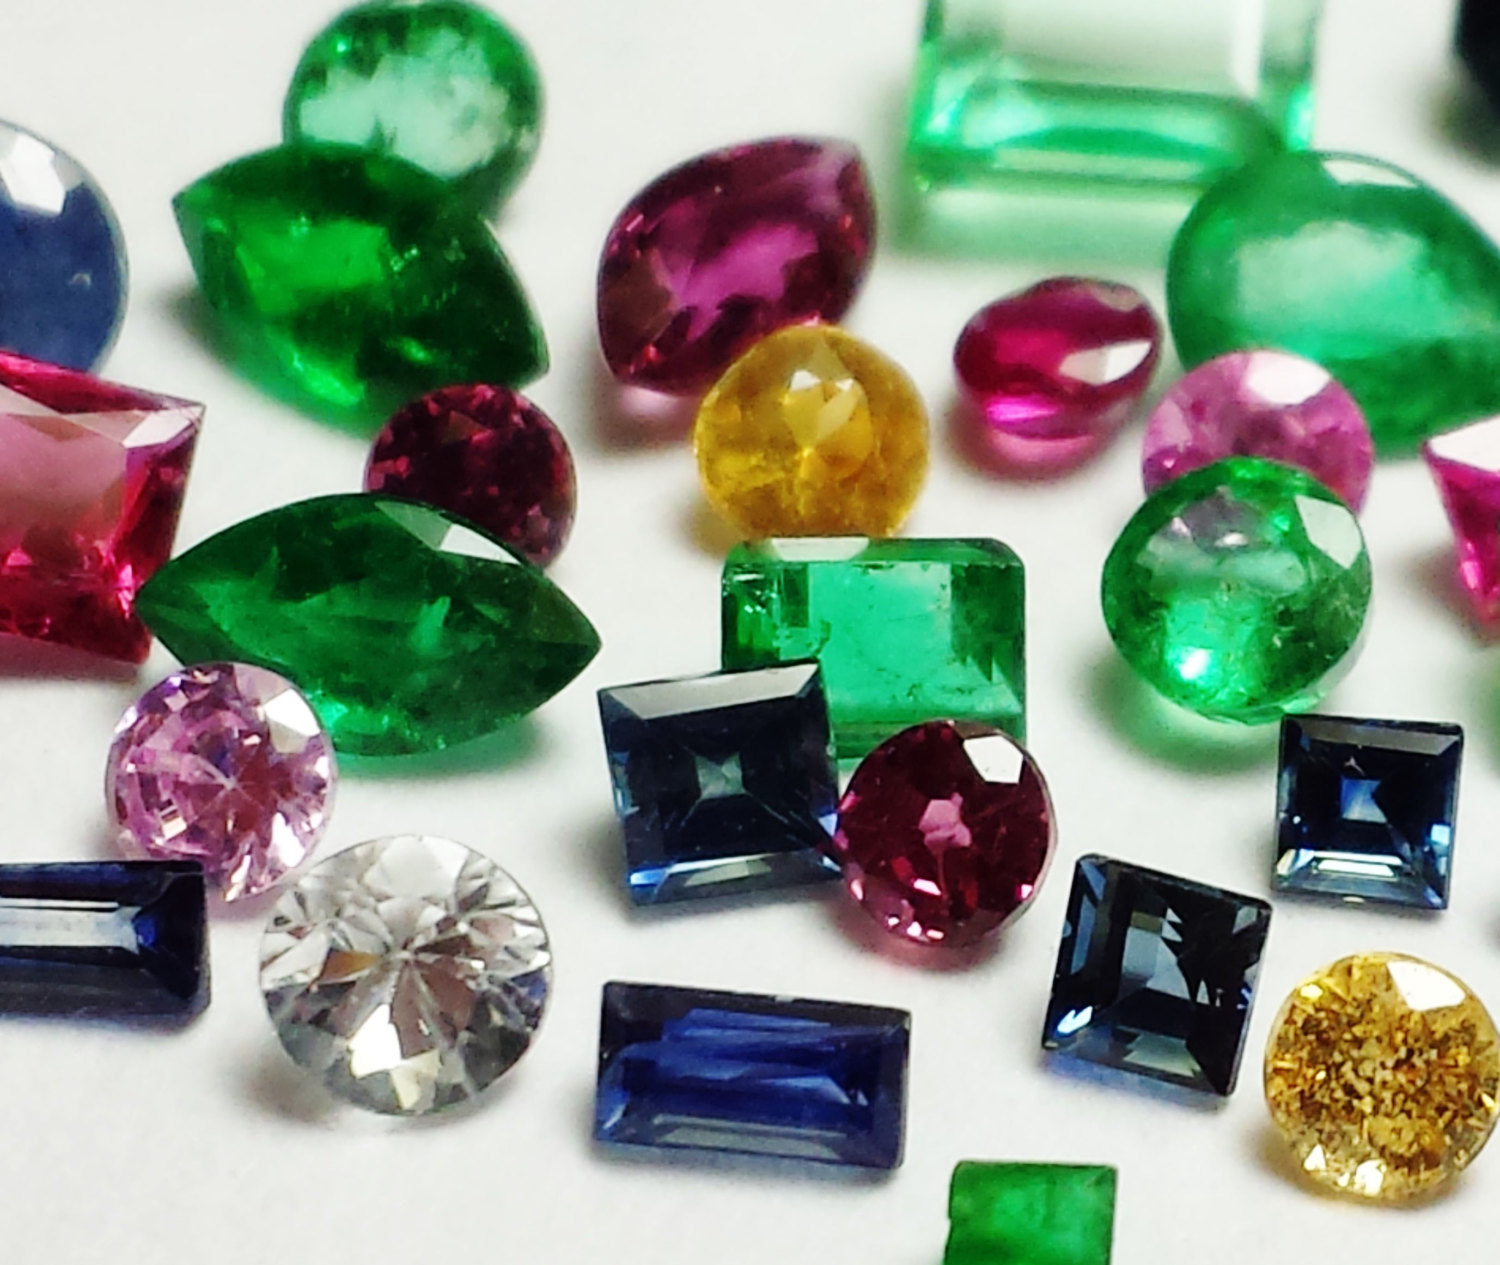 Other colored gems